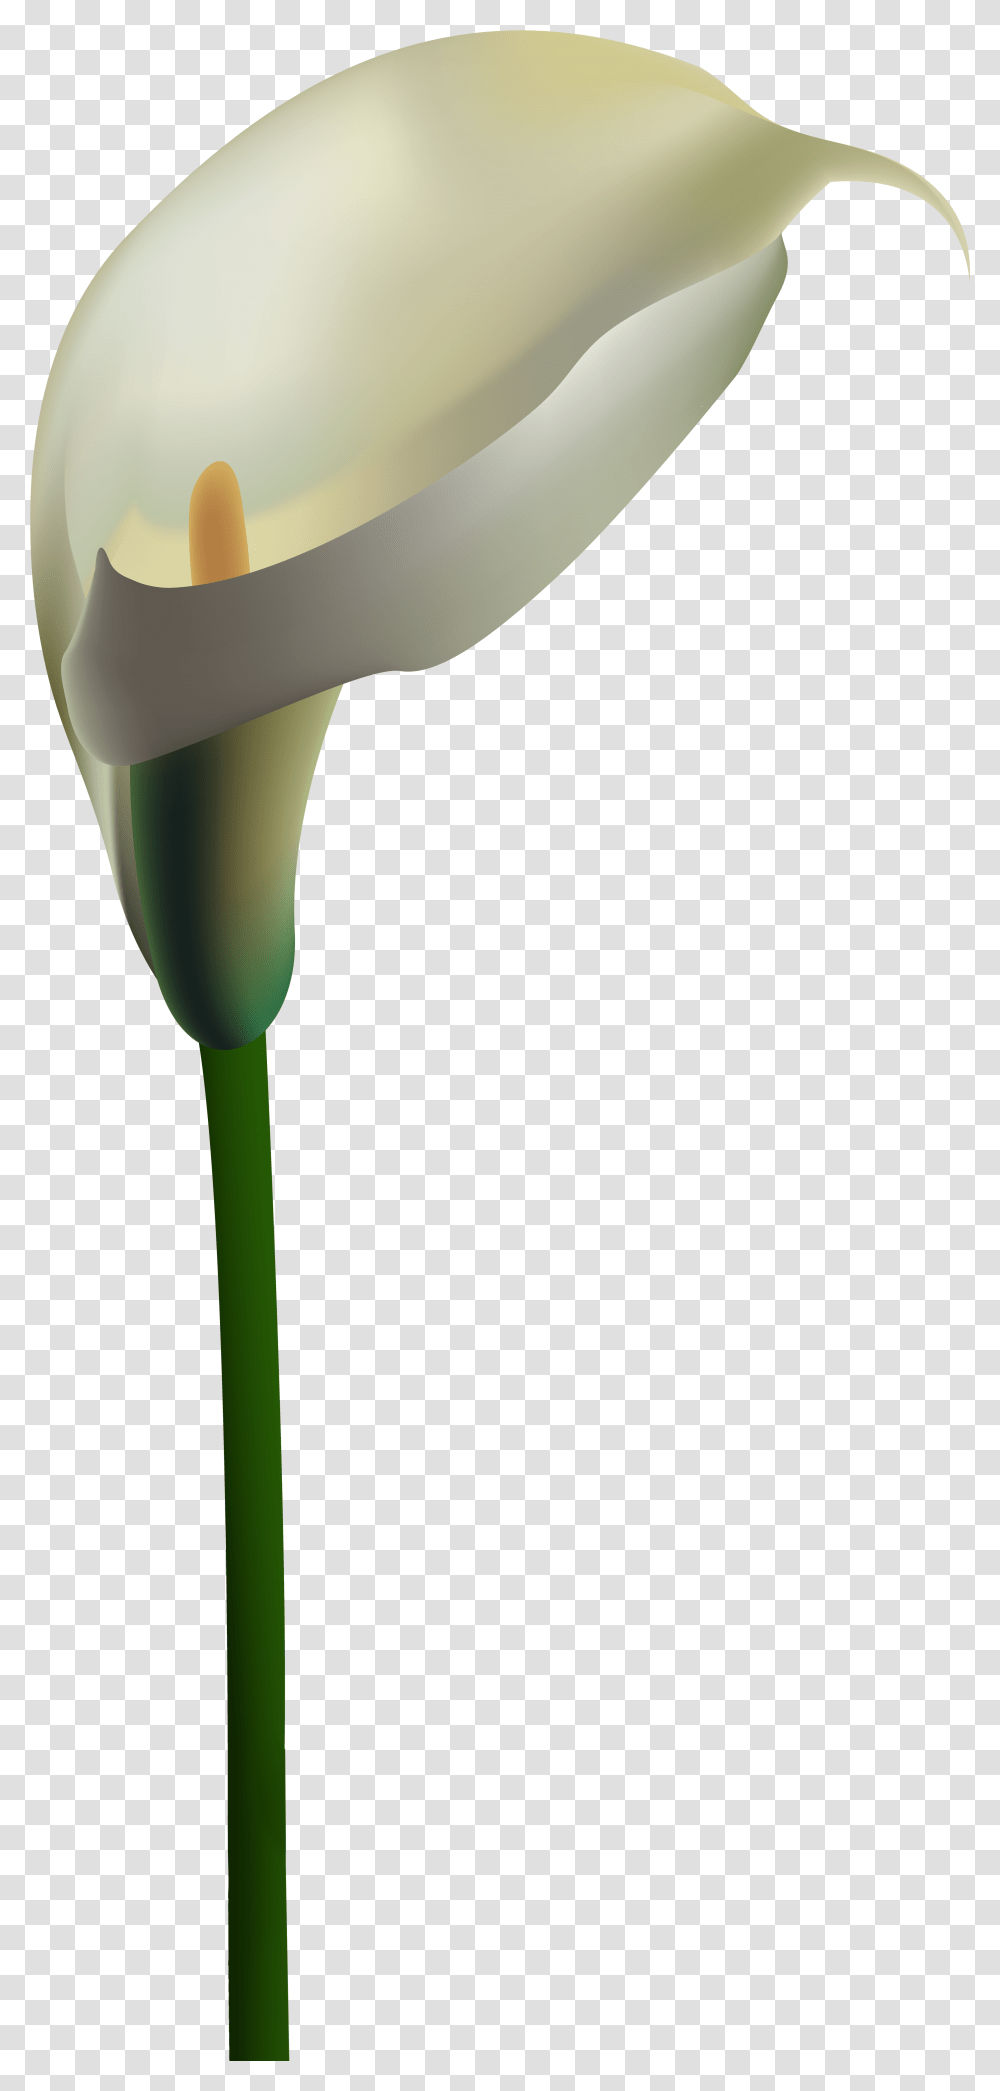 White Calla Lily Clipart Download Calla Lily Border, Plant, Blow Dryer, Appliance, Hair Drier Transparent Png